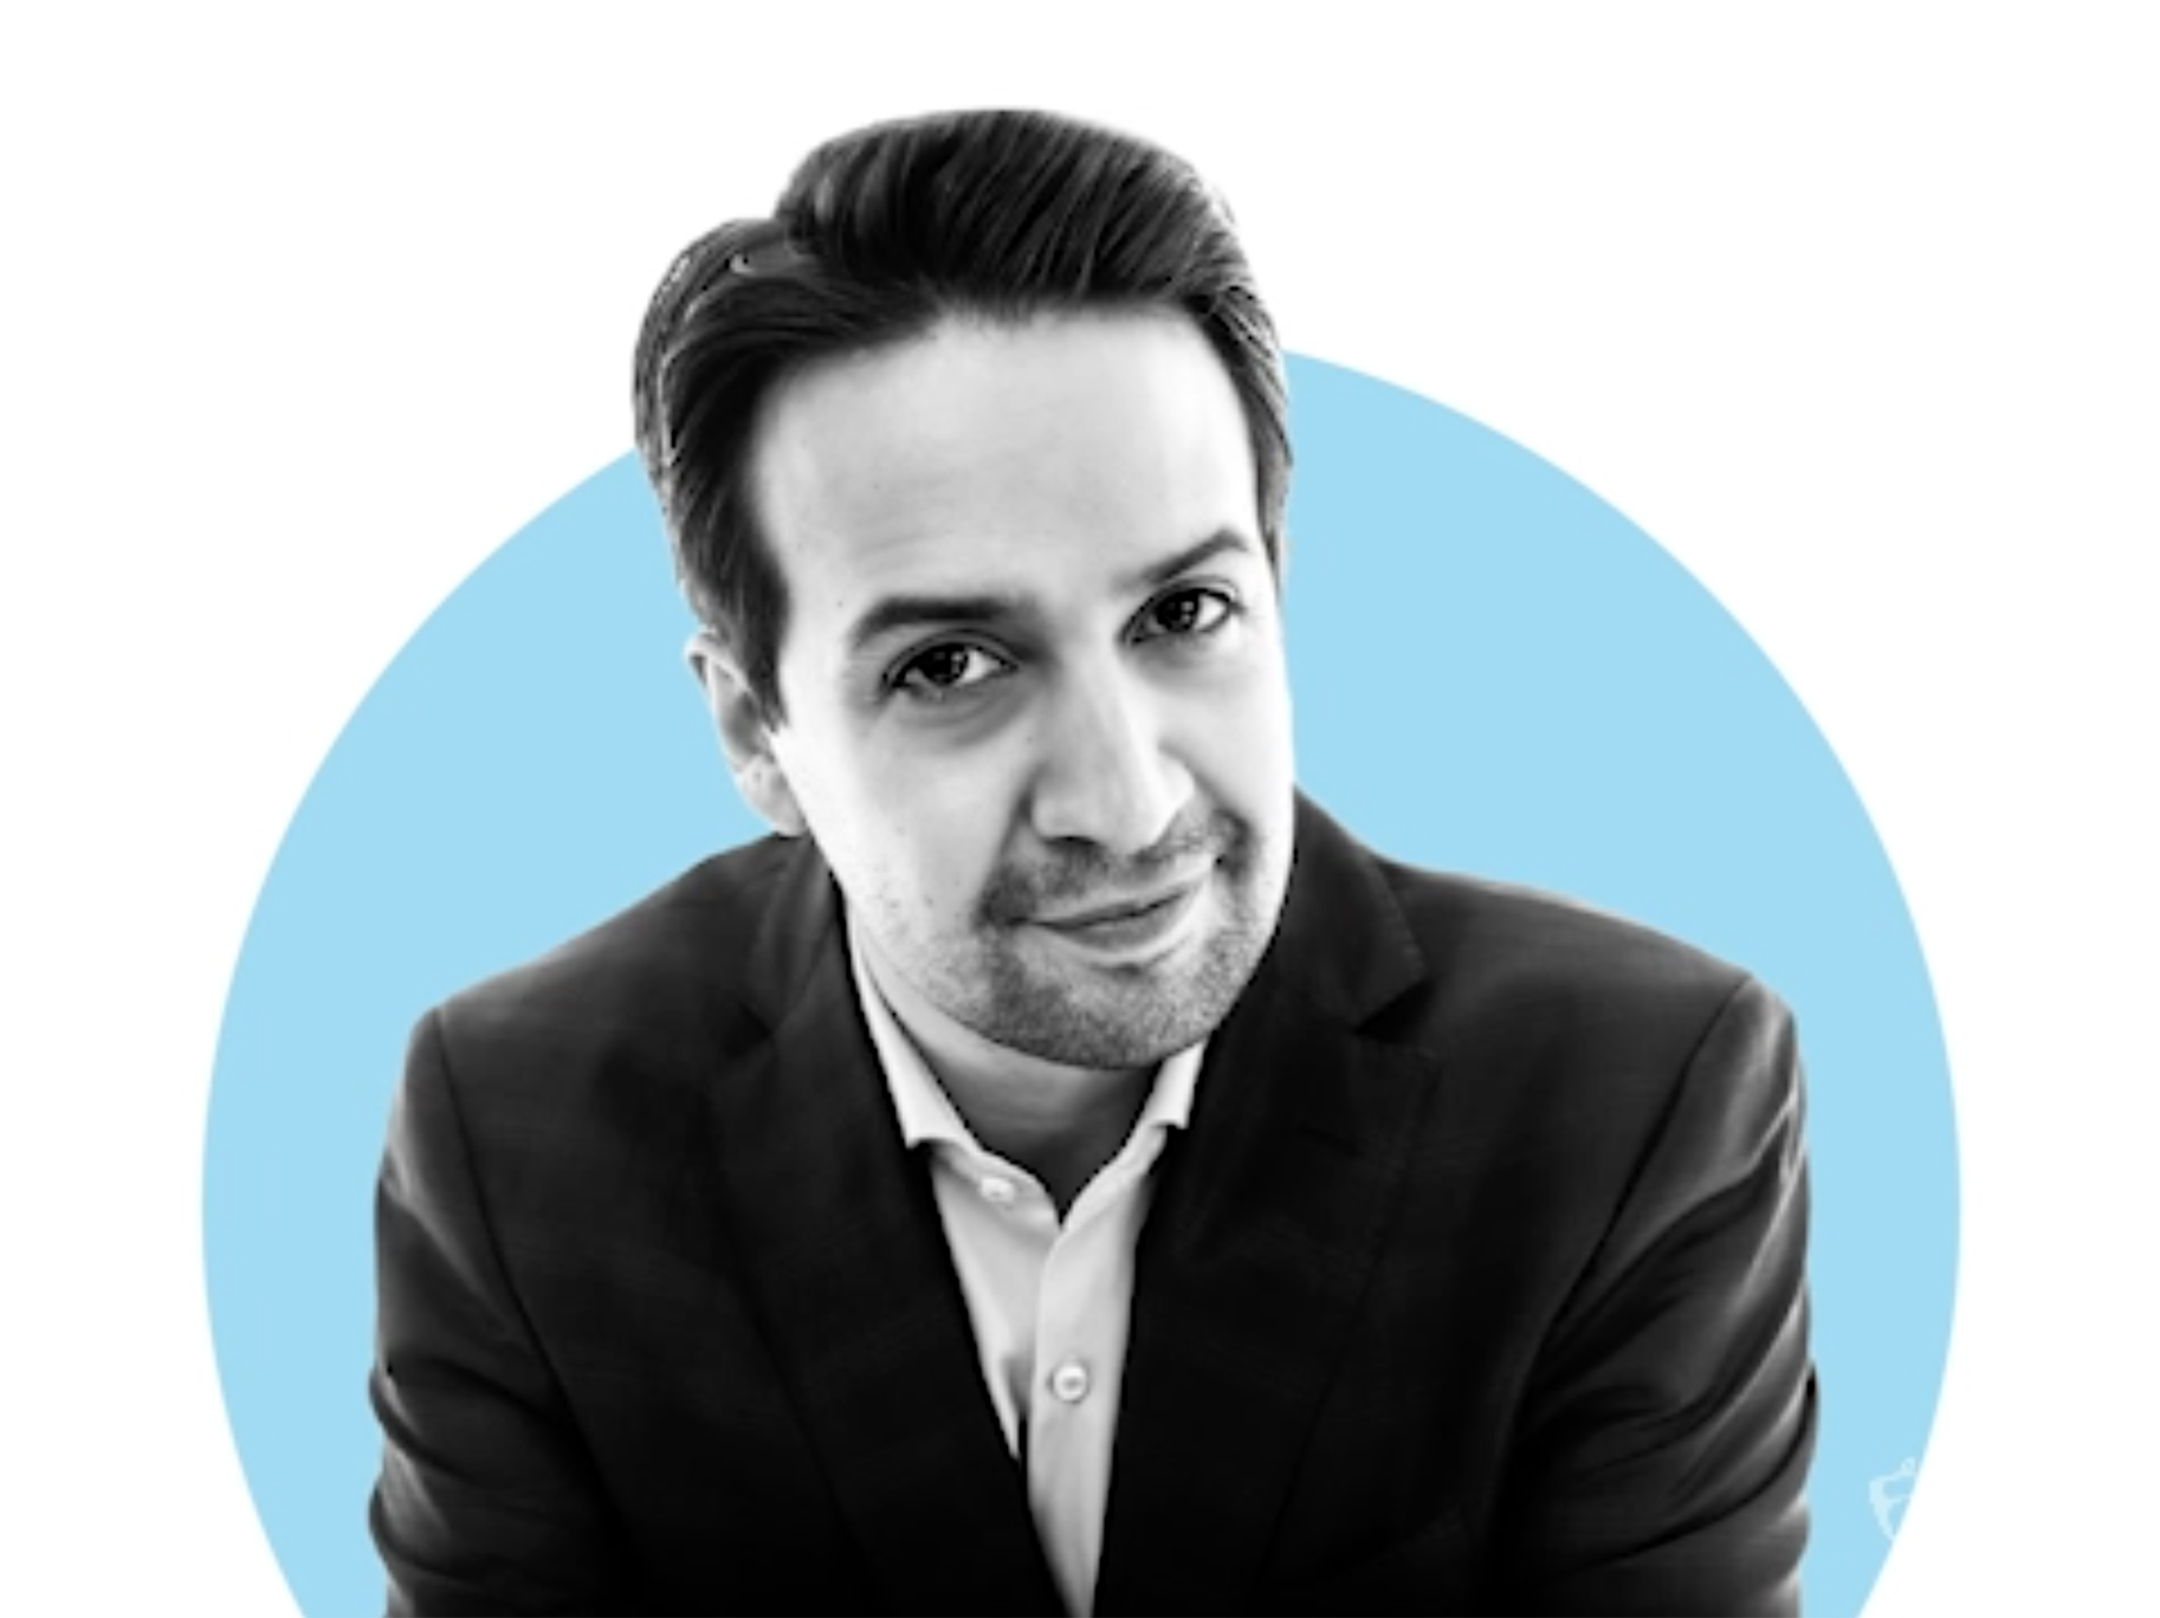 Image of lin-manuel miranda over top a blue circle, which is on a white background